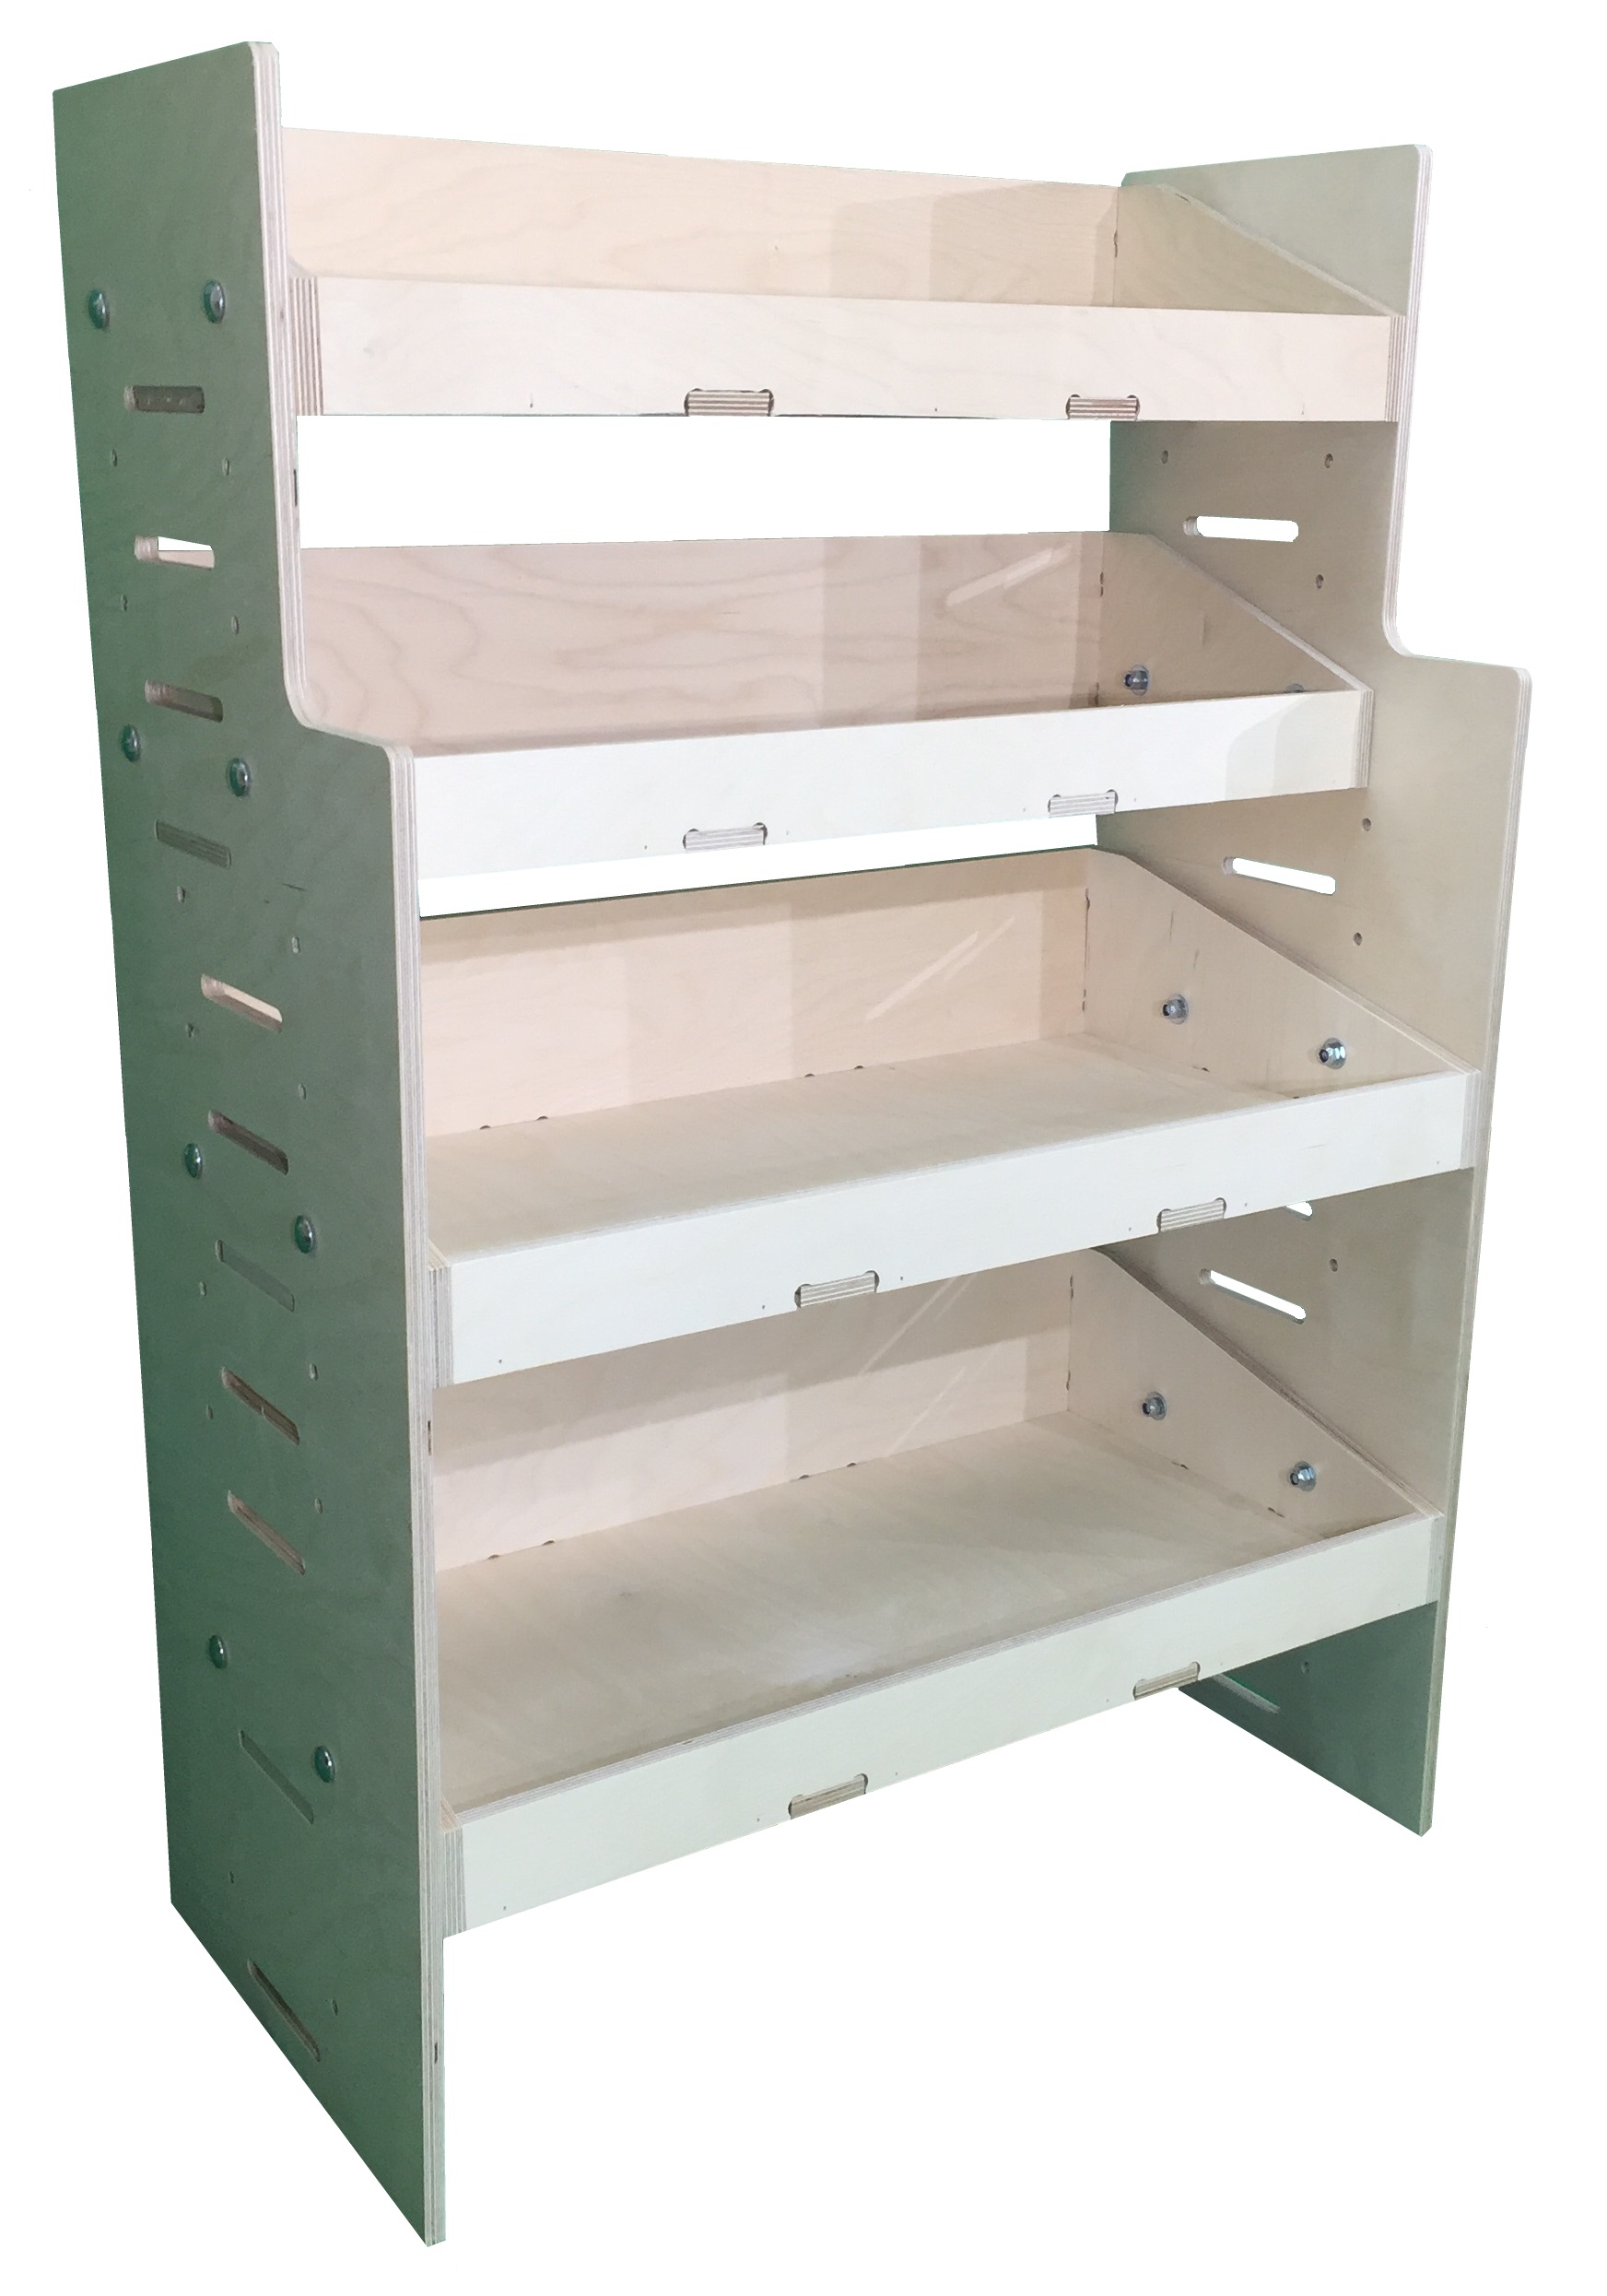 Van Plywood Shelving and Racking Storage System 1087mm(H) x 750mm(W) x 384mm(D) - BVR1075382262